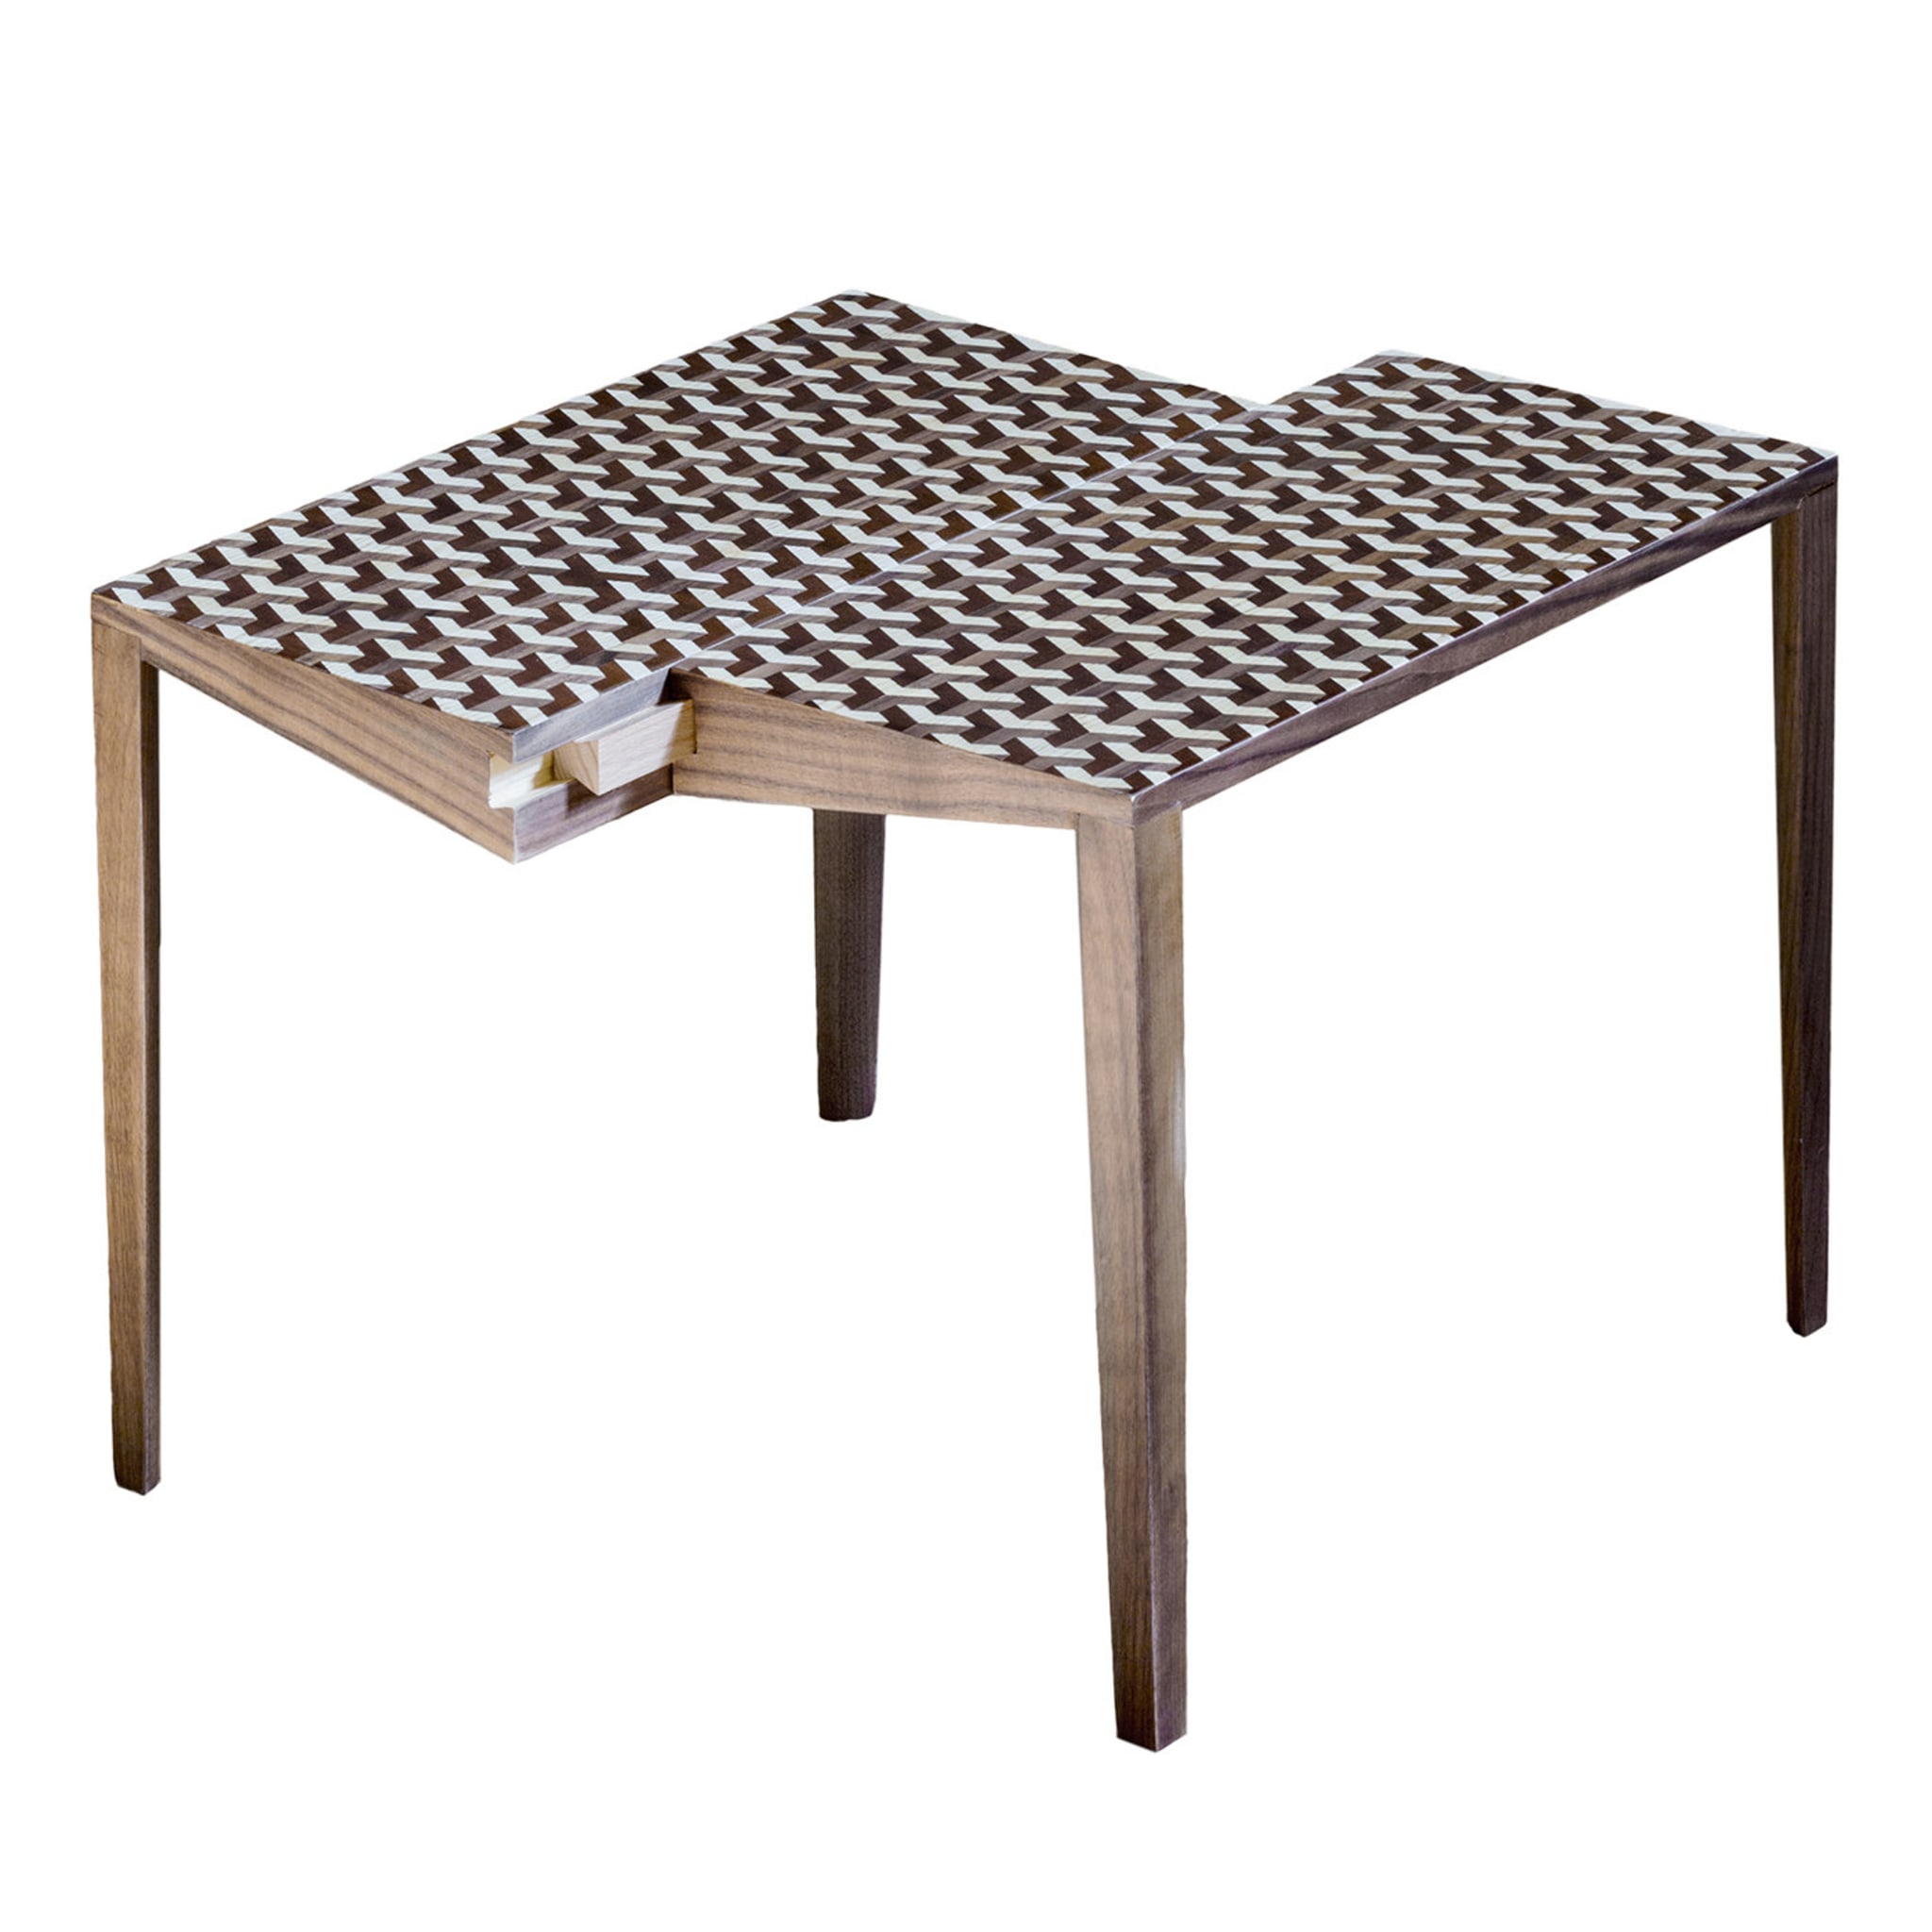 Trame Parallele Coffee Table by Gum Design - Main view